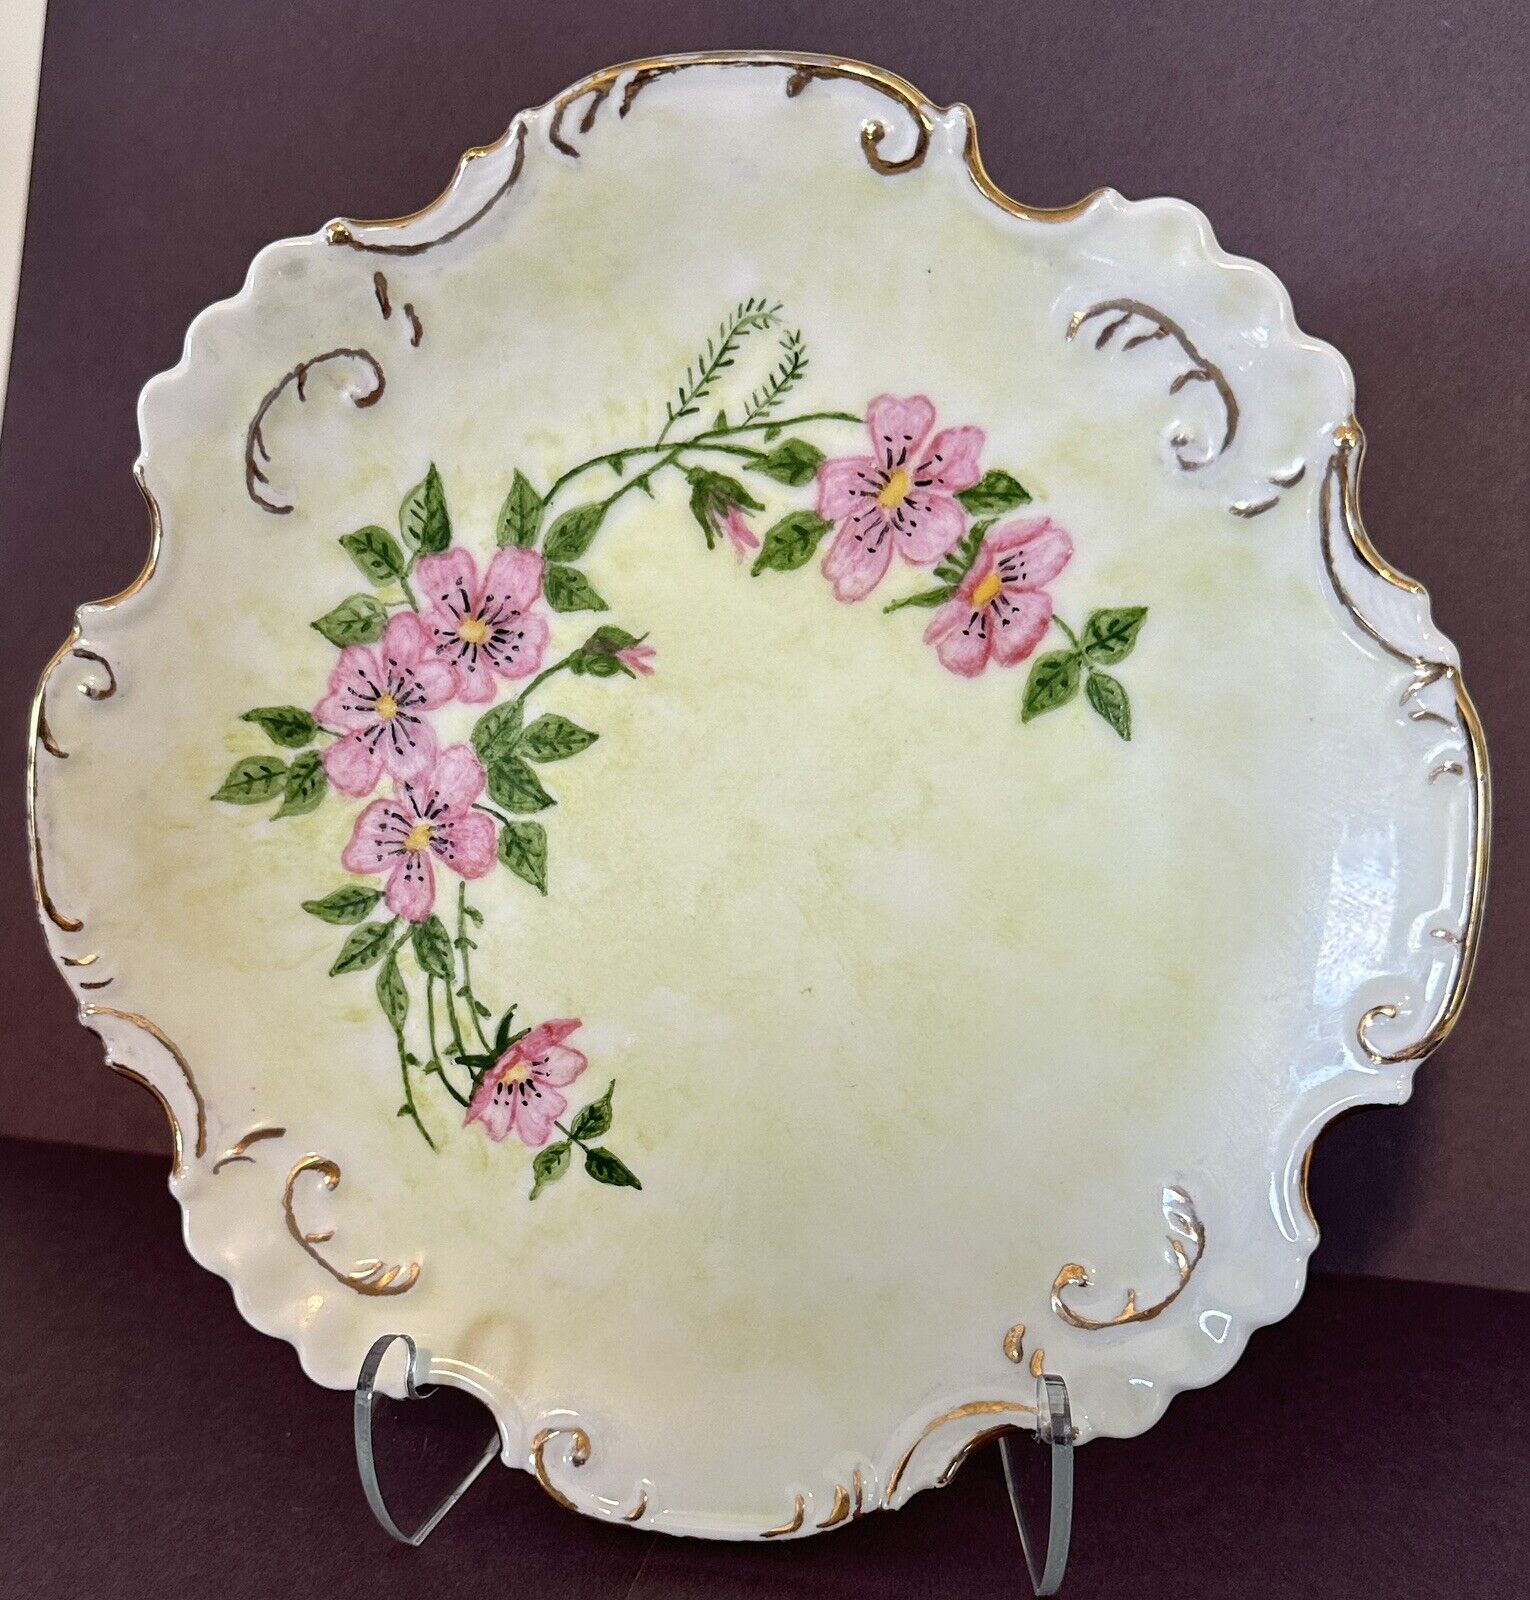 Vintage OOAK Hand Painted Rose Plate Gold Gilded Trim Patina Signed Victorian